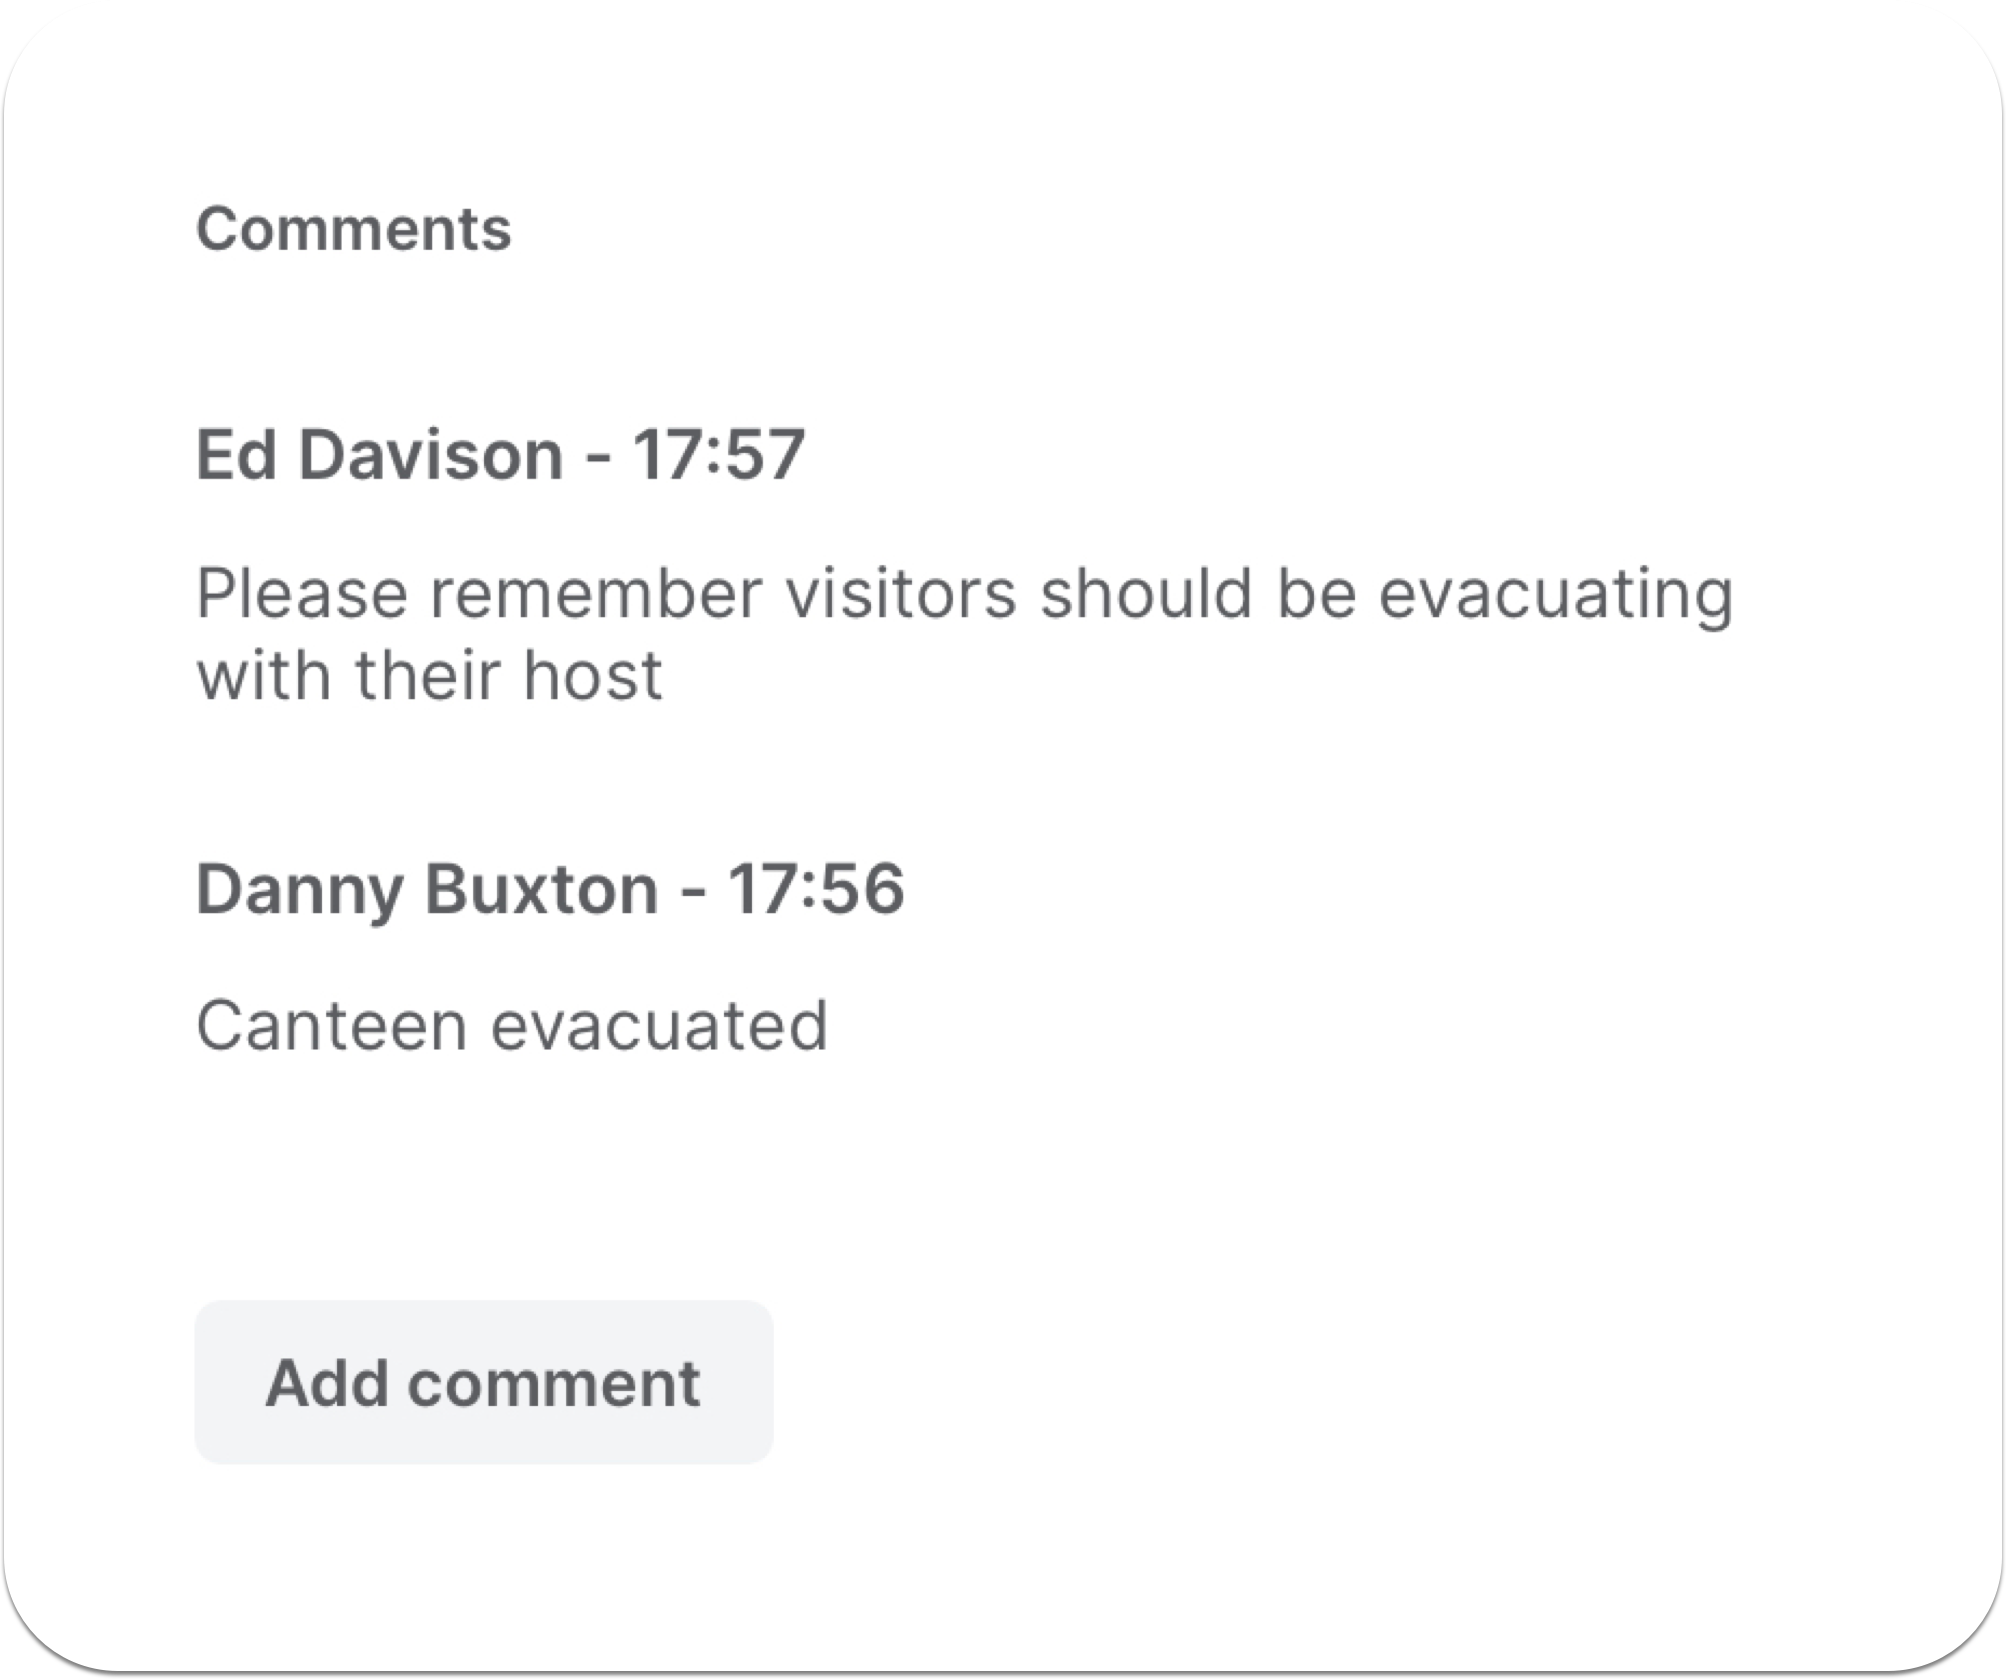 Comments being added to the shared evacuation report in real time